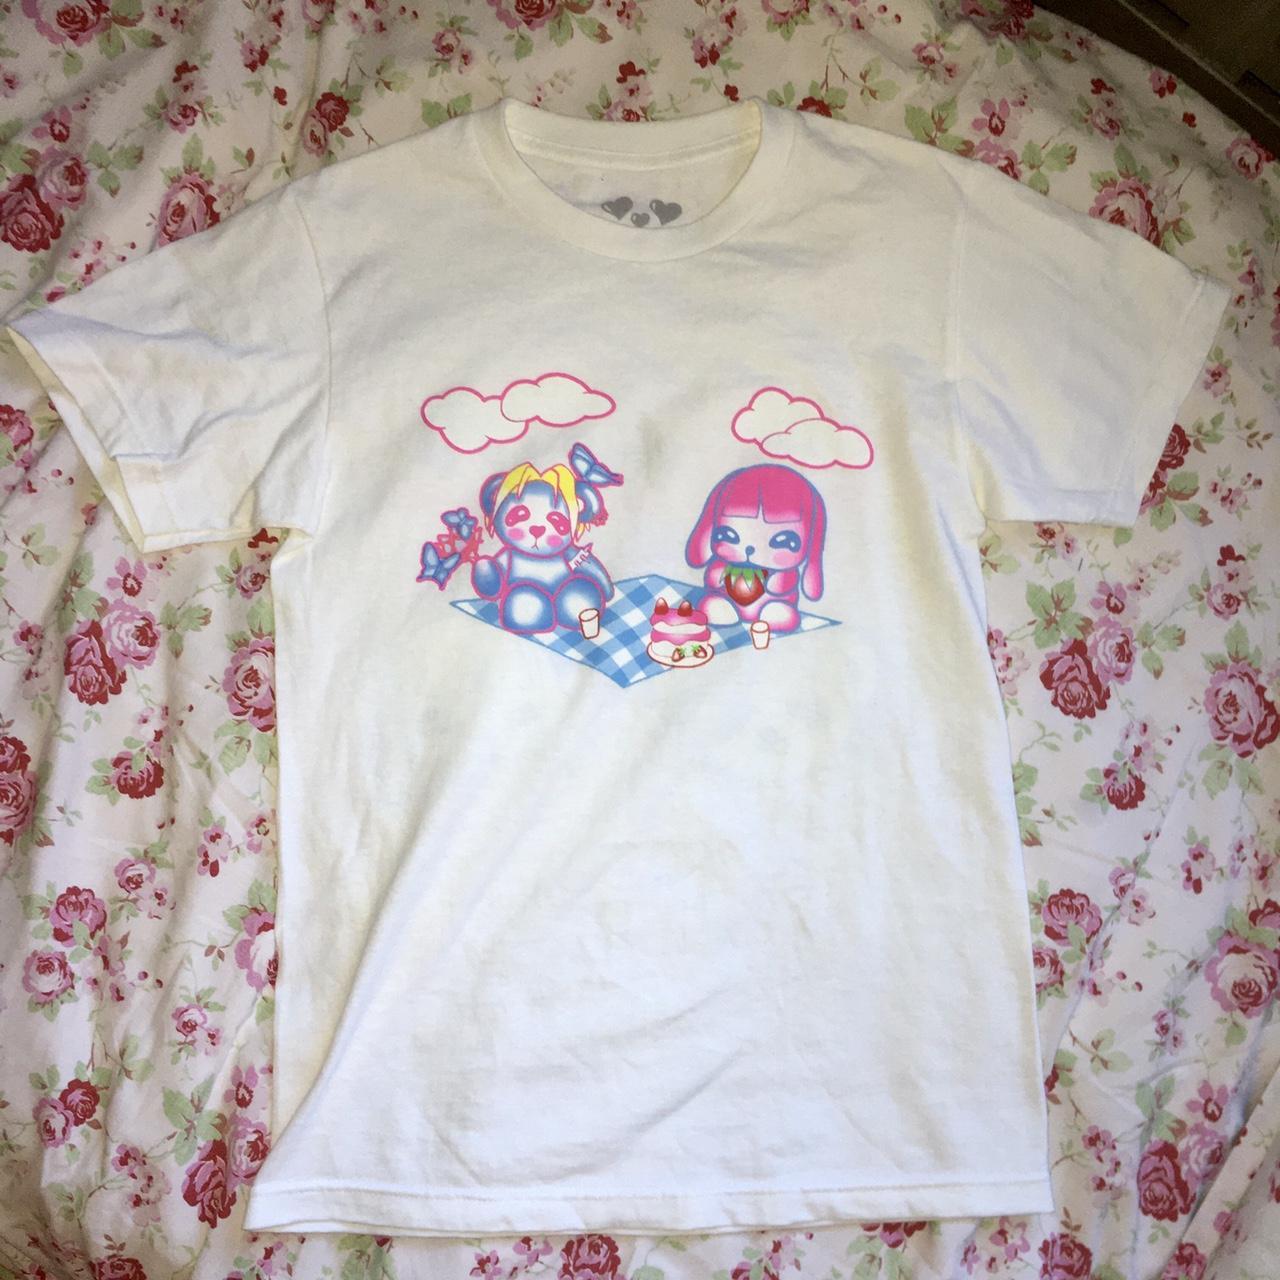 Angel Blue Women's White and Pink T-shirt (4)